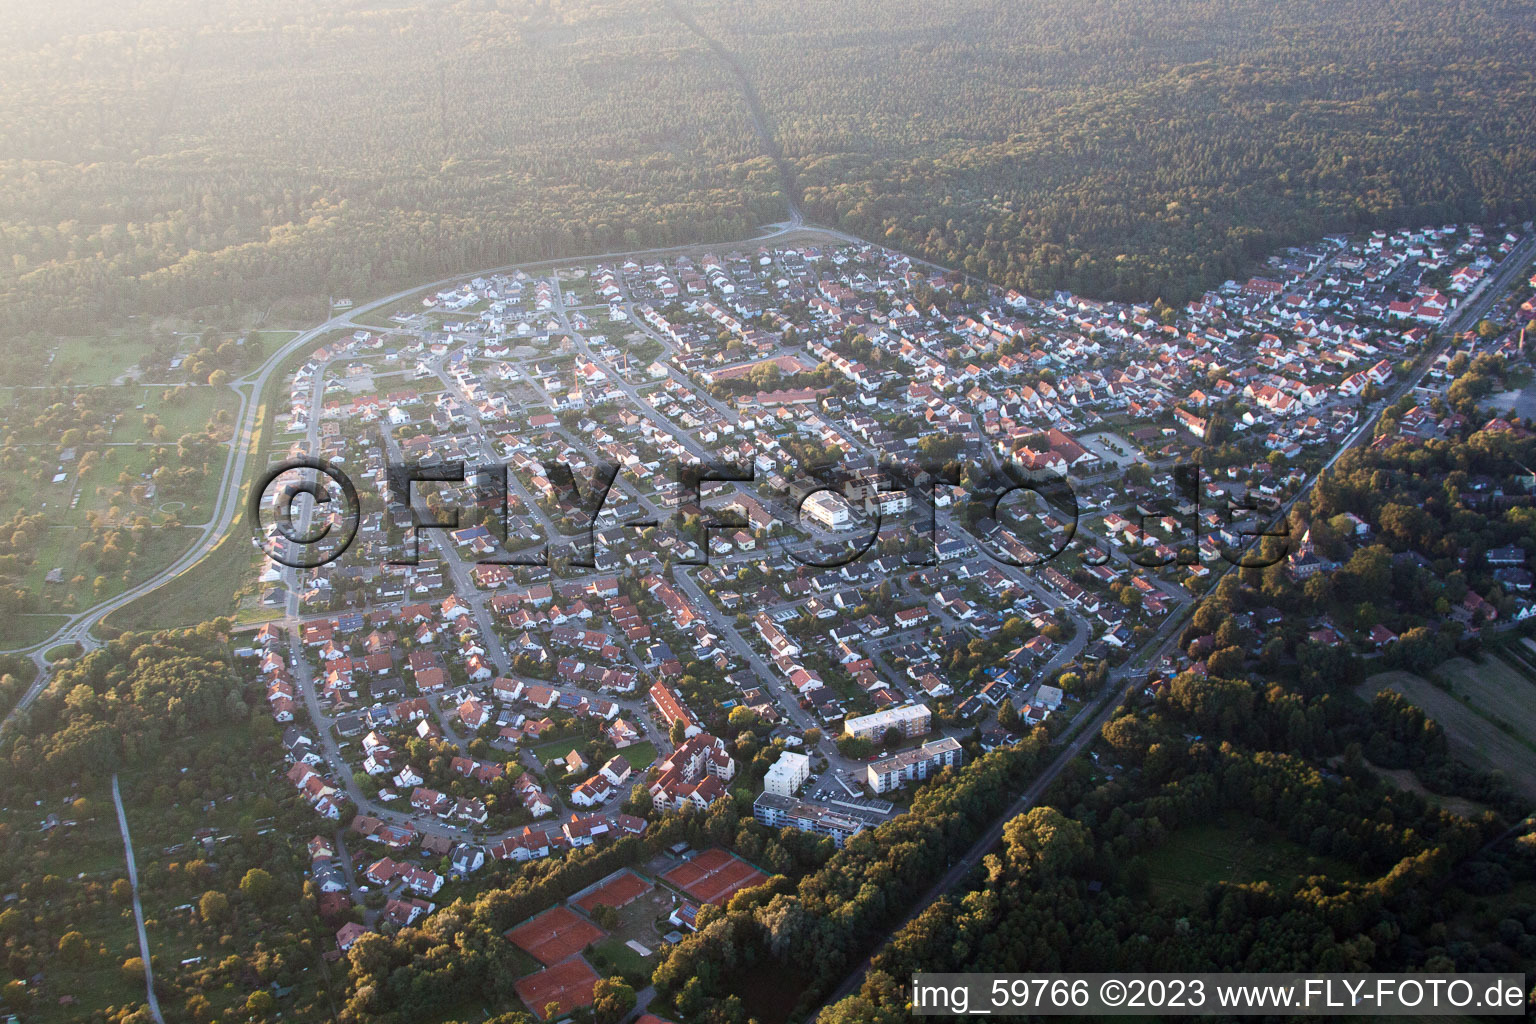 Jockgrim in the state Rhineland-Palatinate, Germany viewn from the air